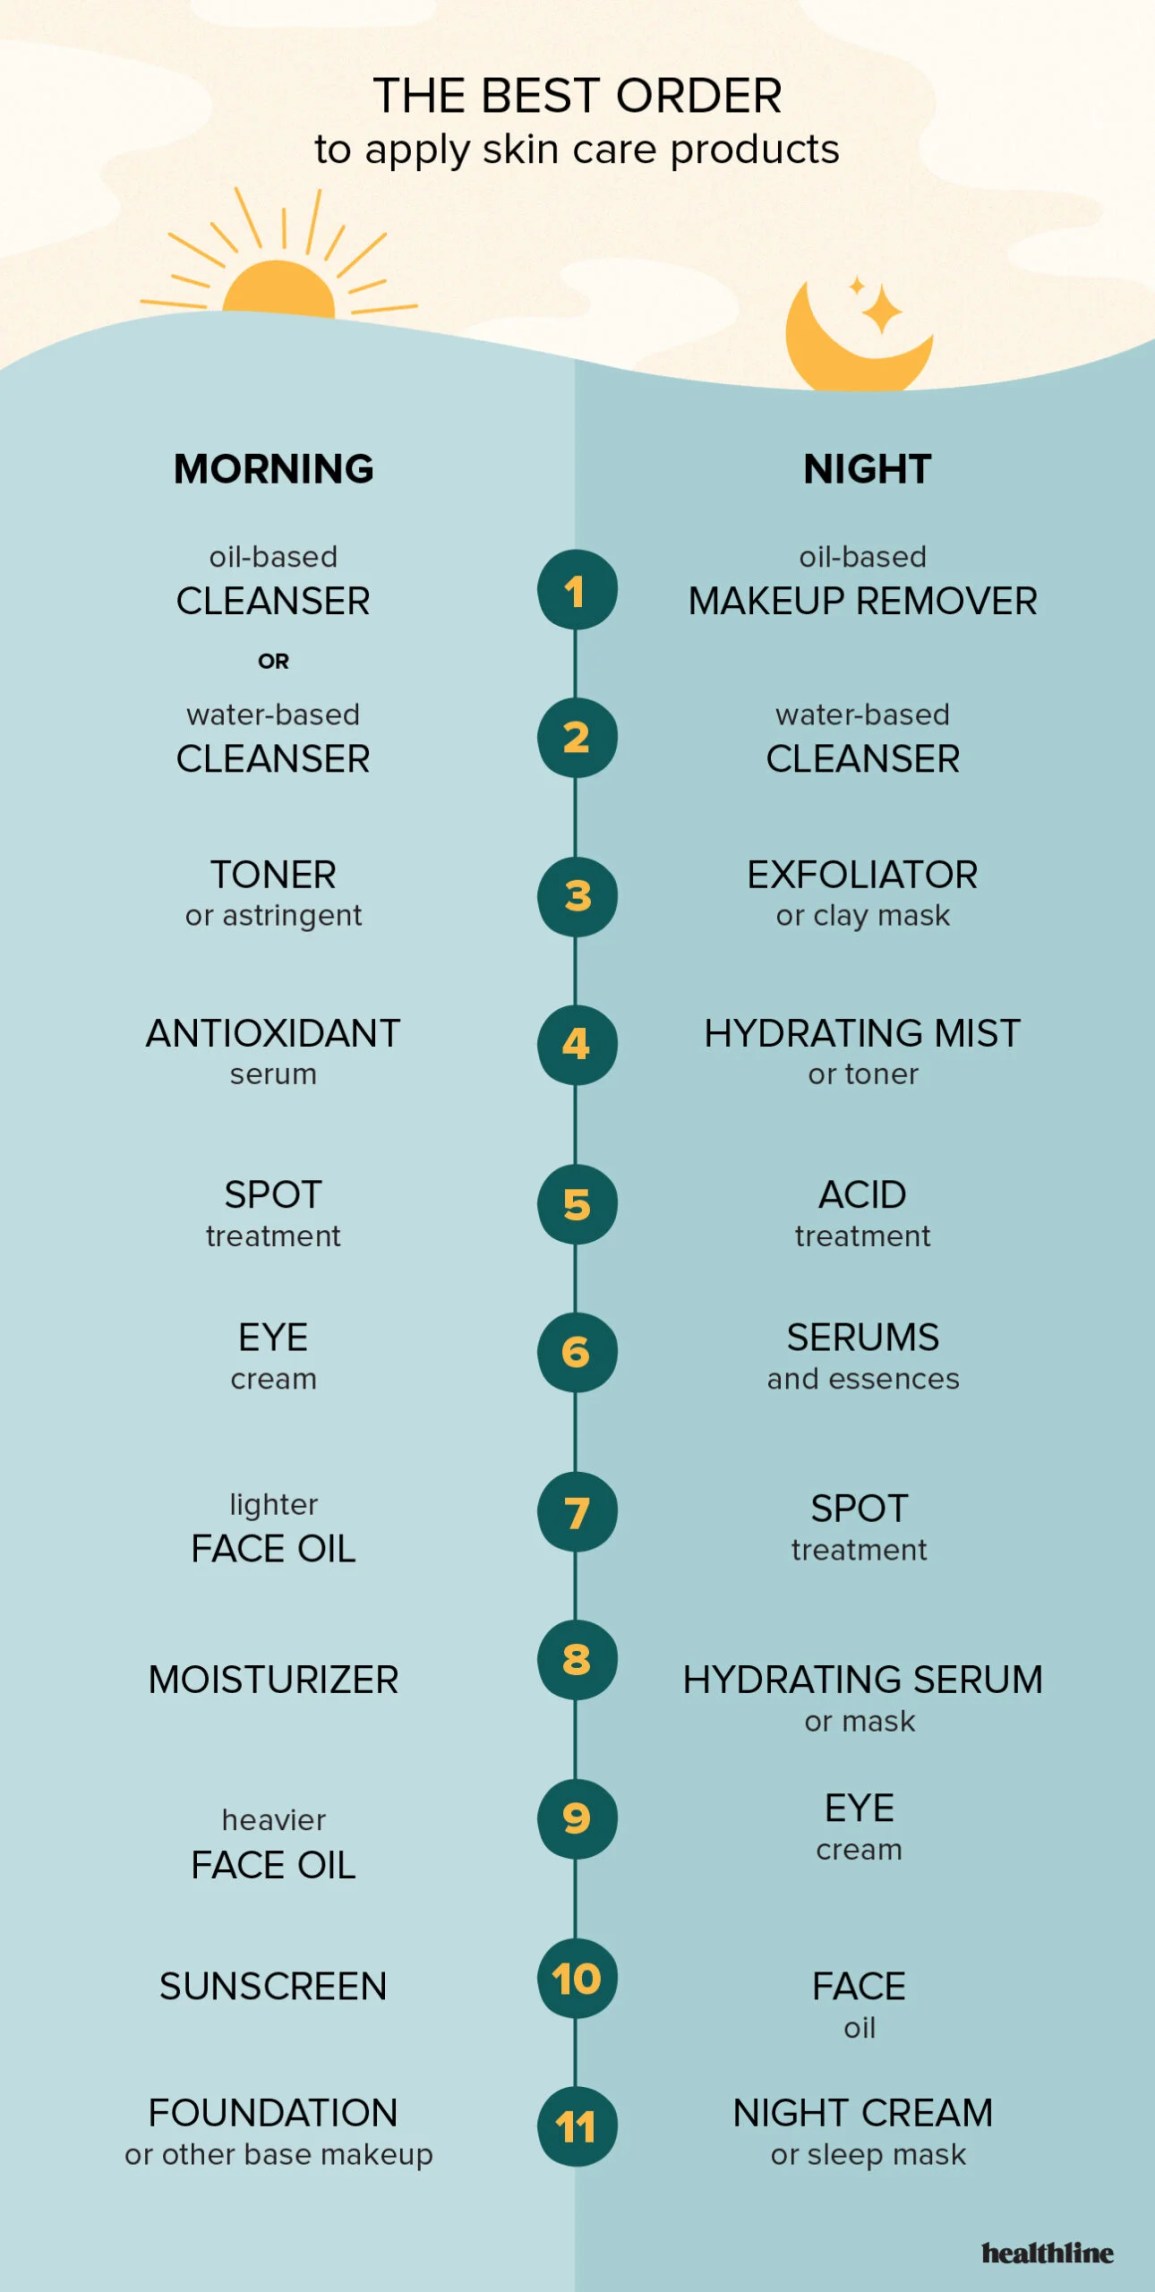 How Often Should I Replace My Skincare Products?